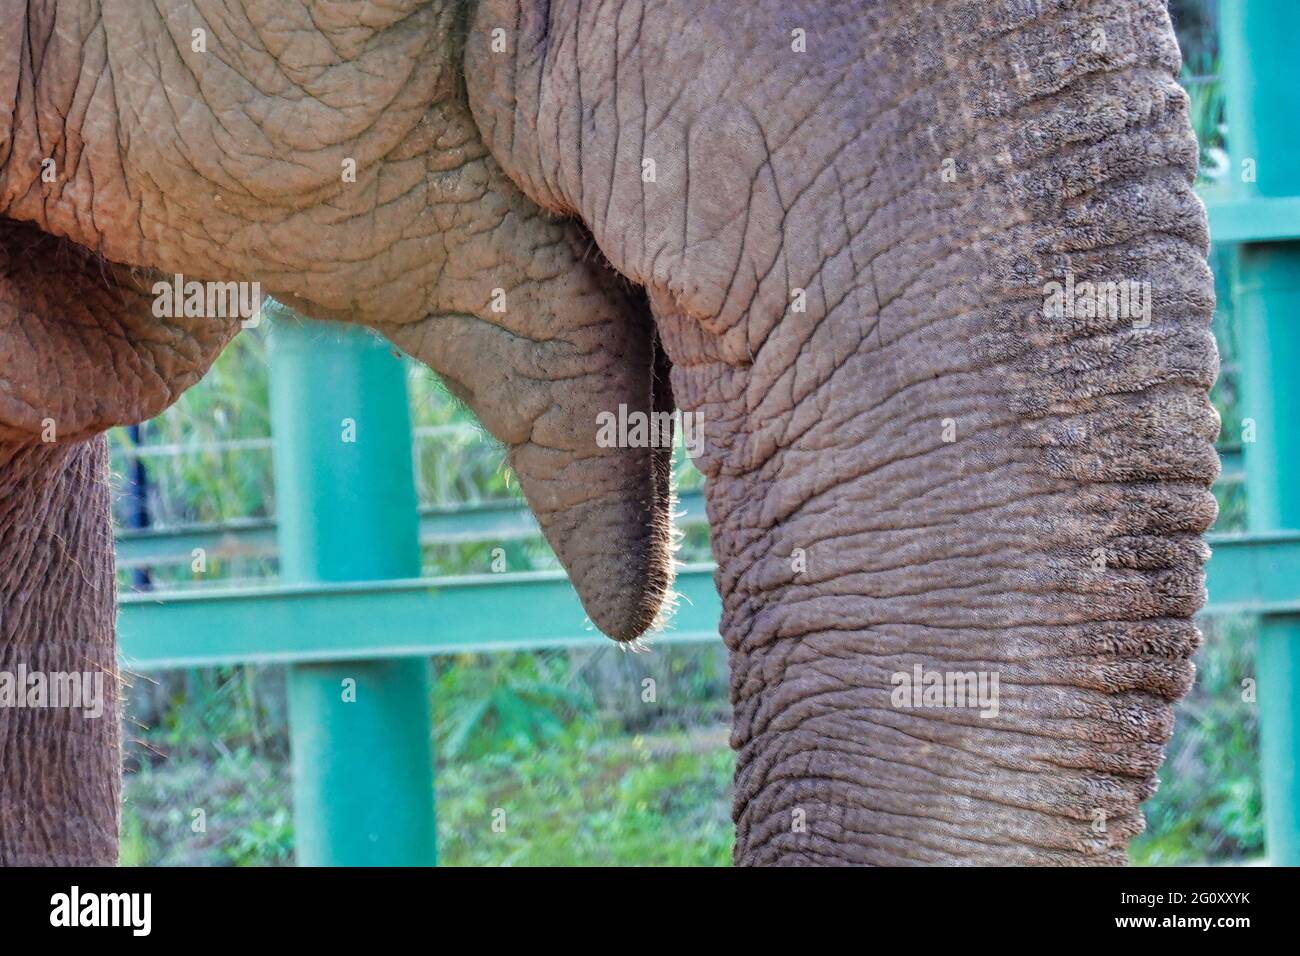 Closeup shot of an open mouth and trunk of an elephant Stock Photo